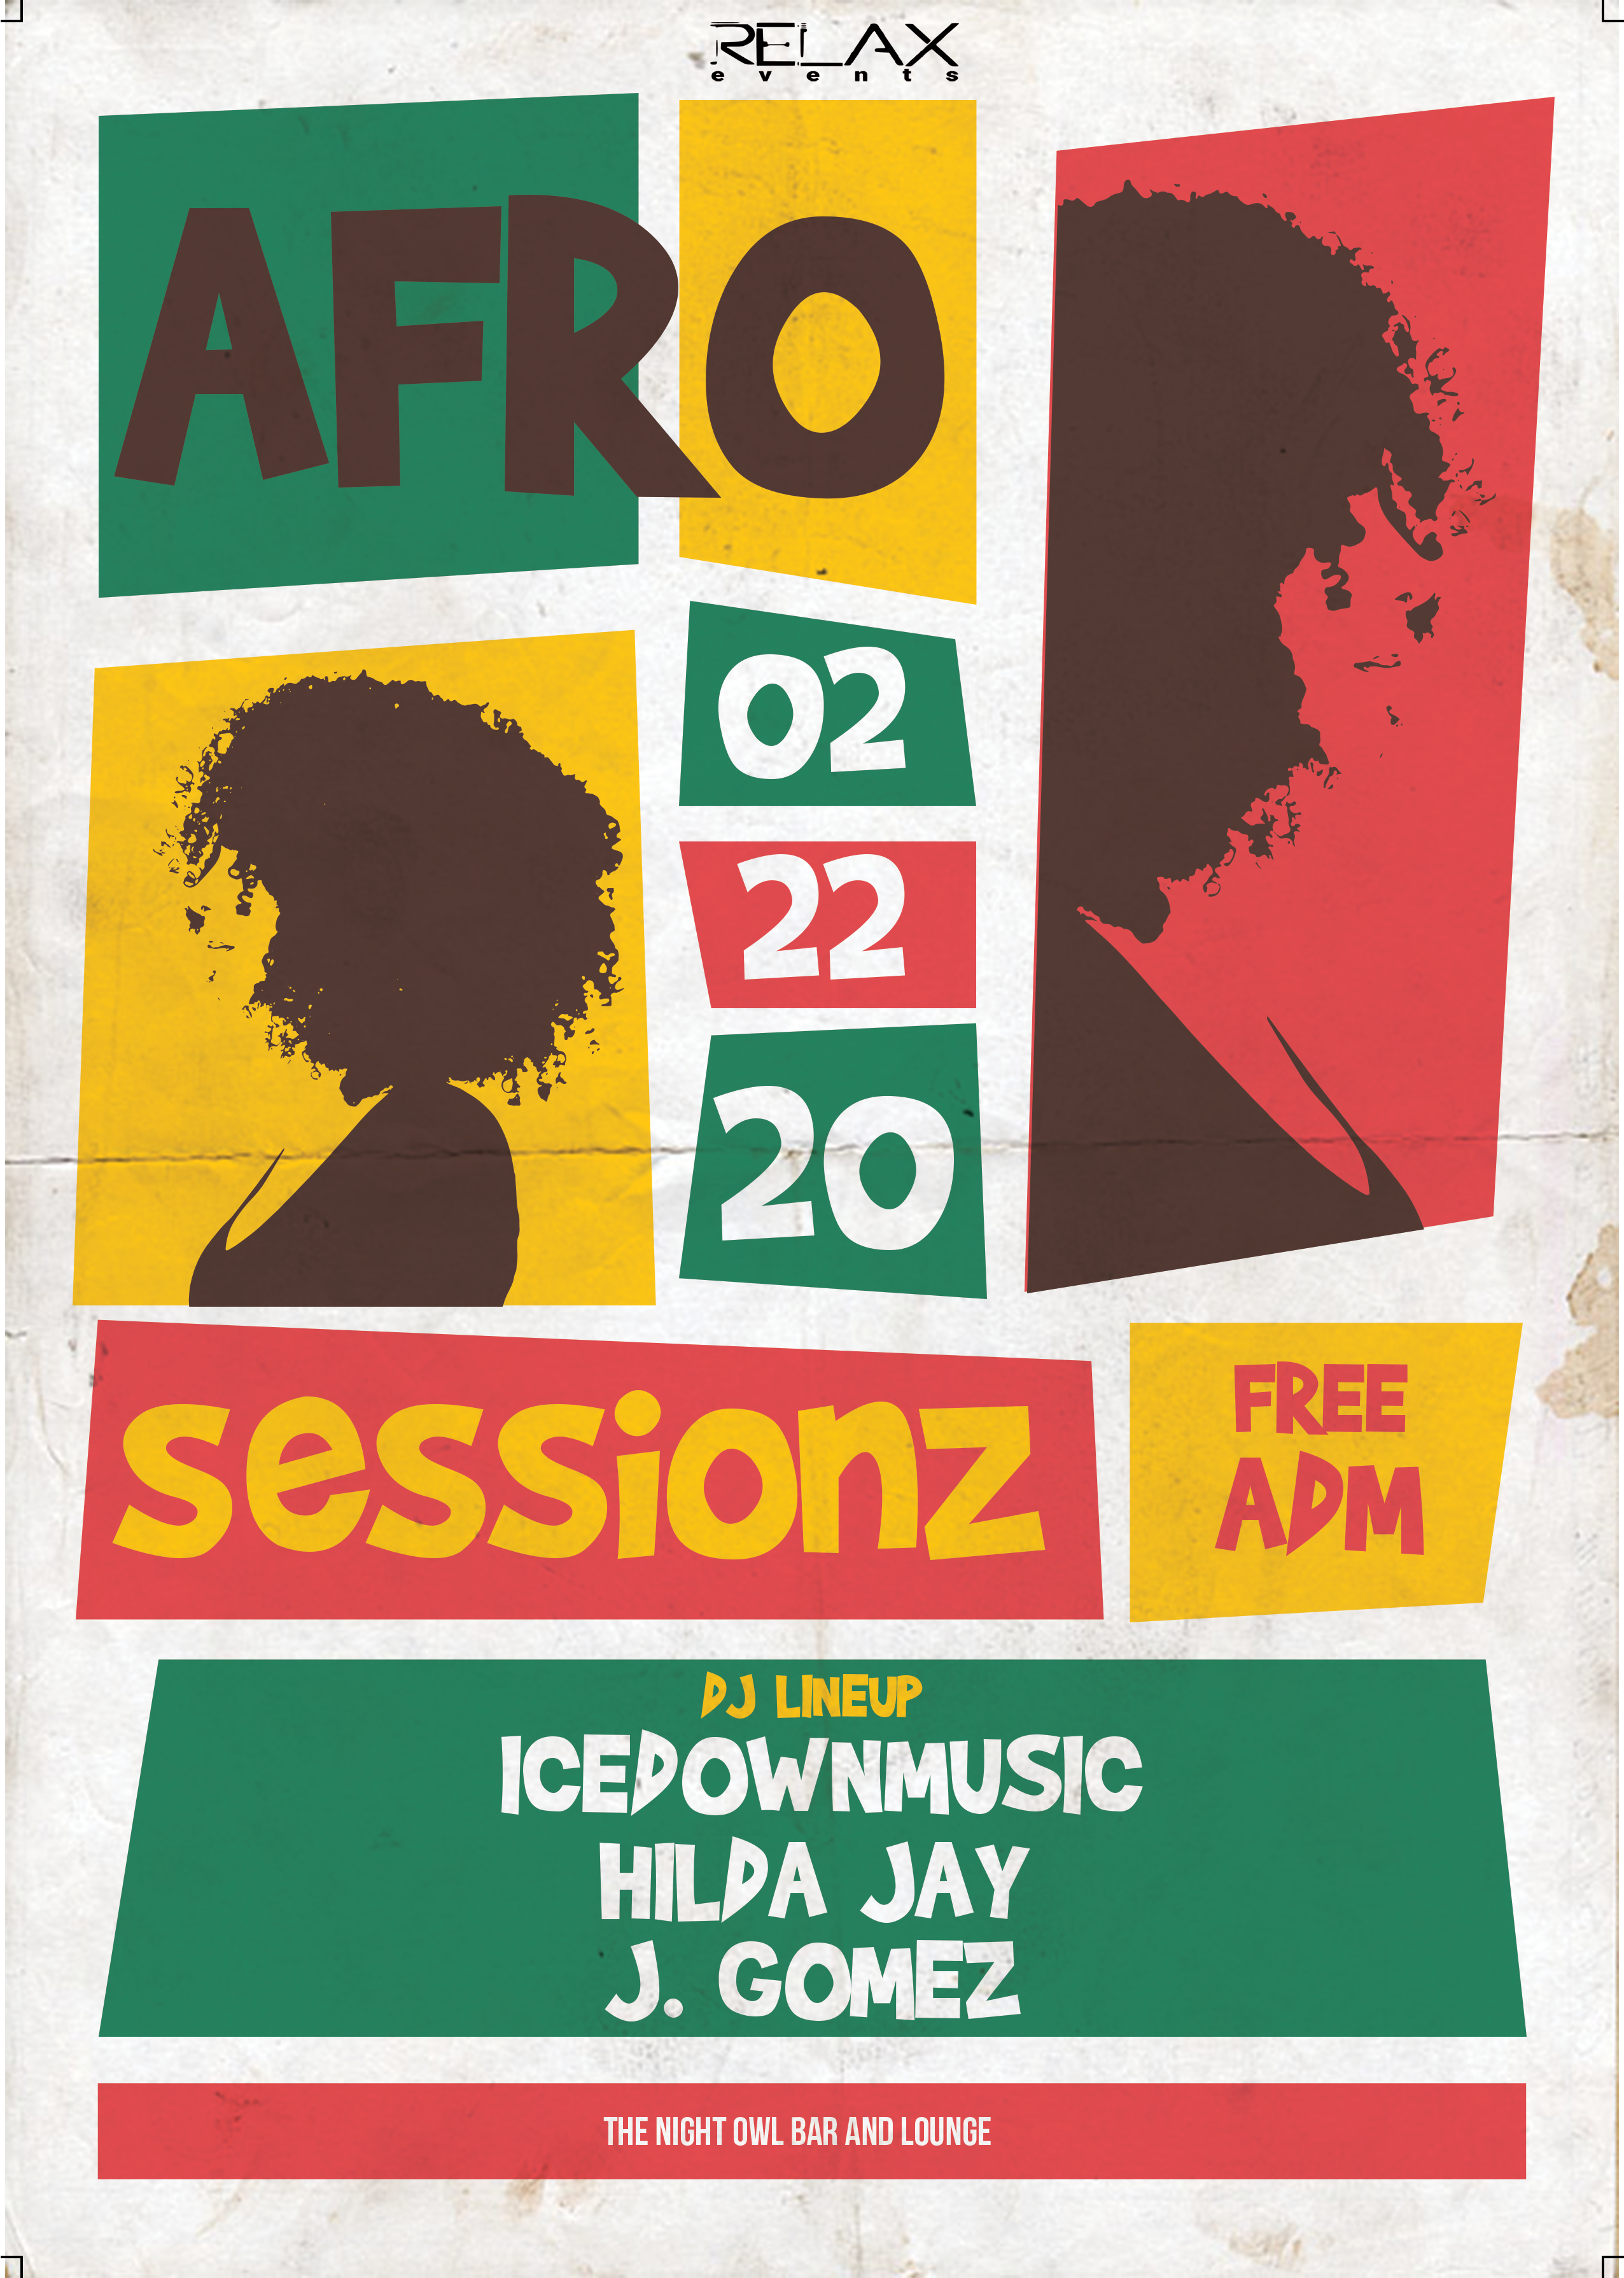 Afro Sessionz - Hail South Africa